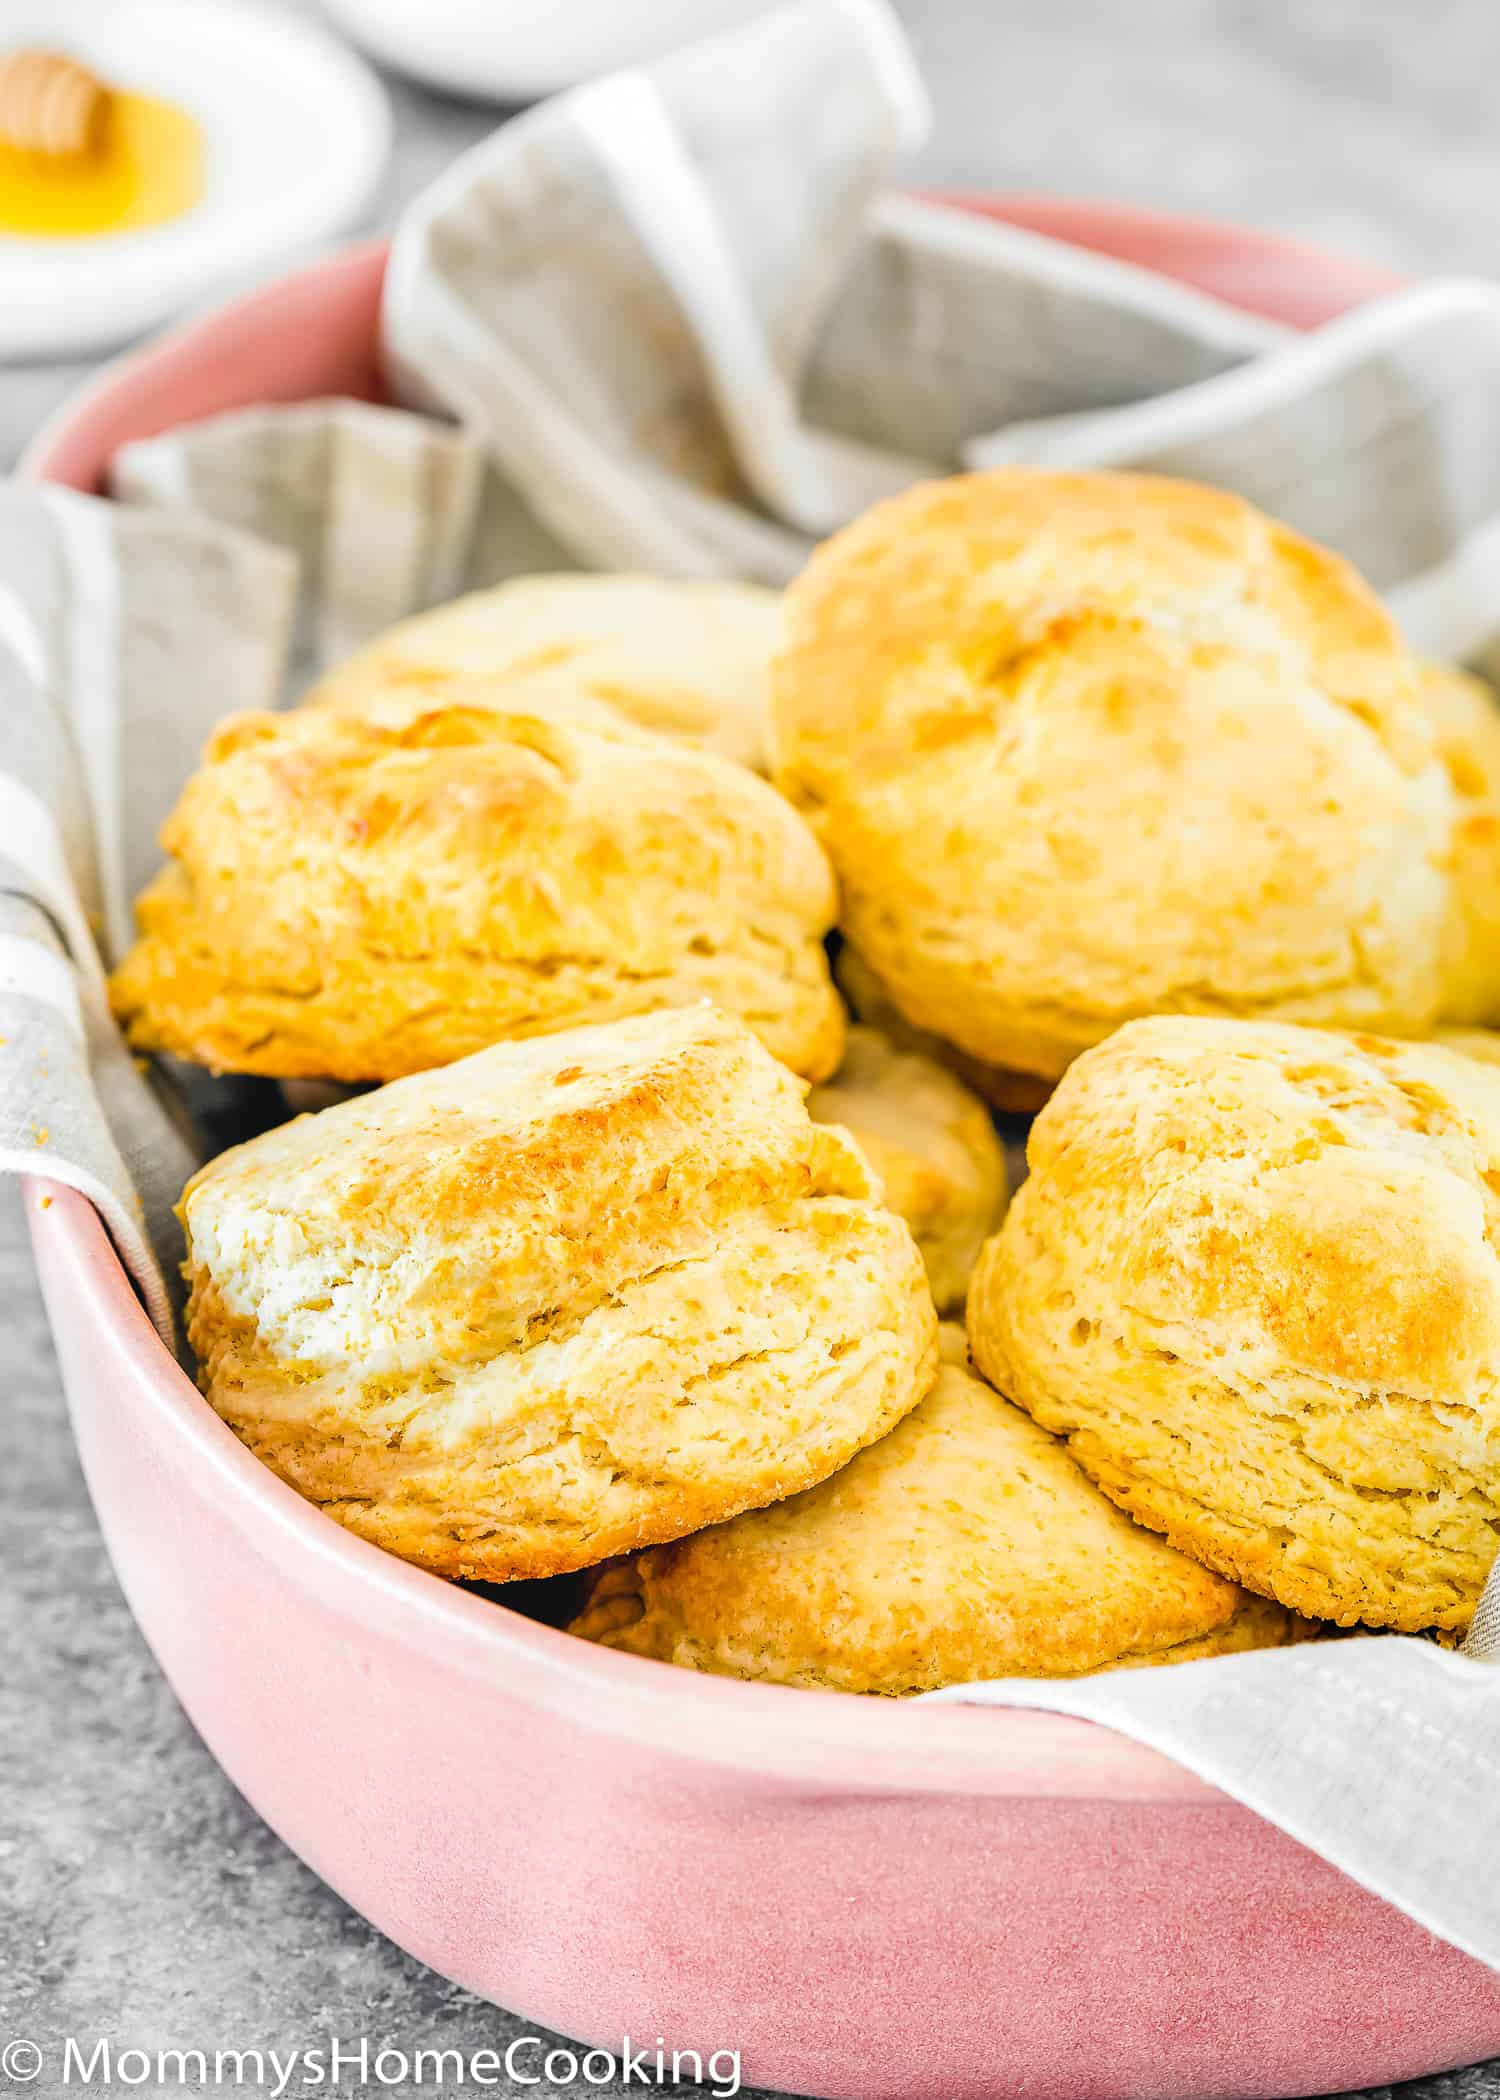 egg-free homemade biscuits in a serving bowl with a gray kitchen towel.